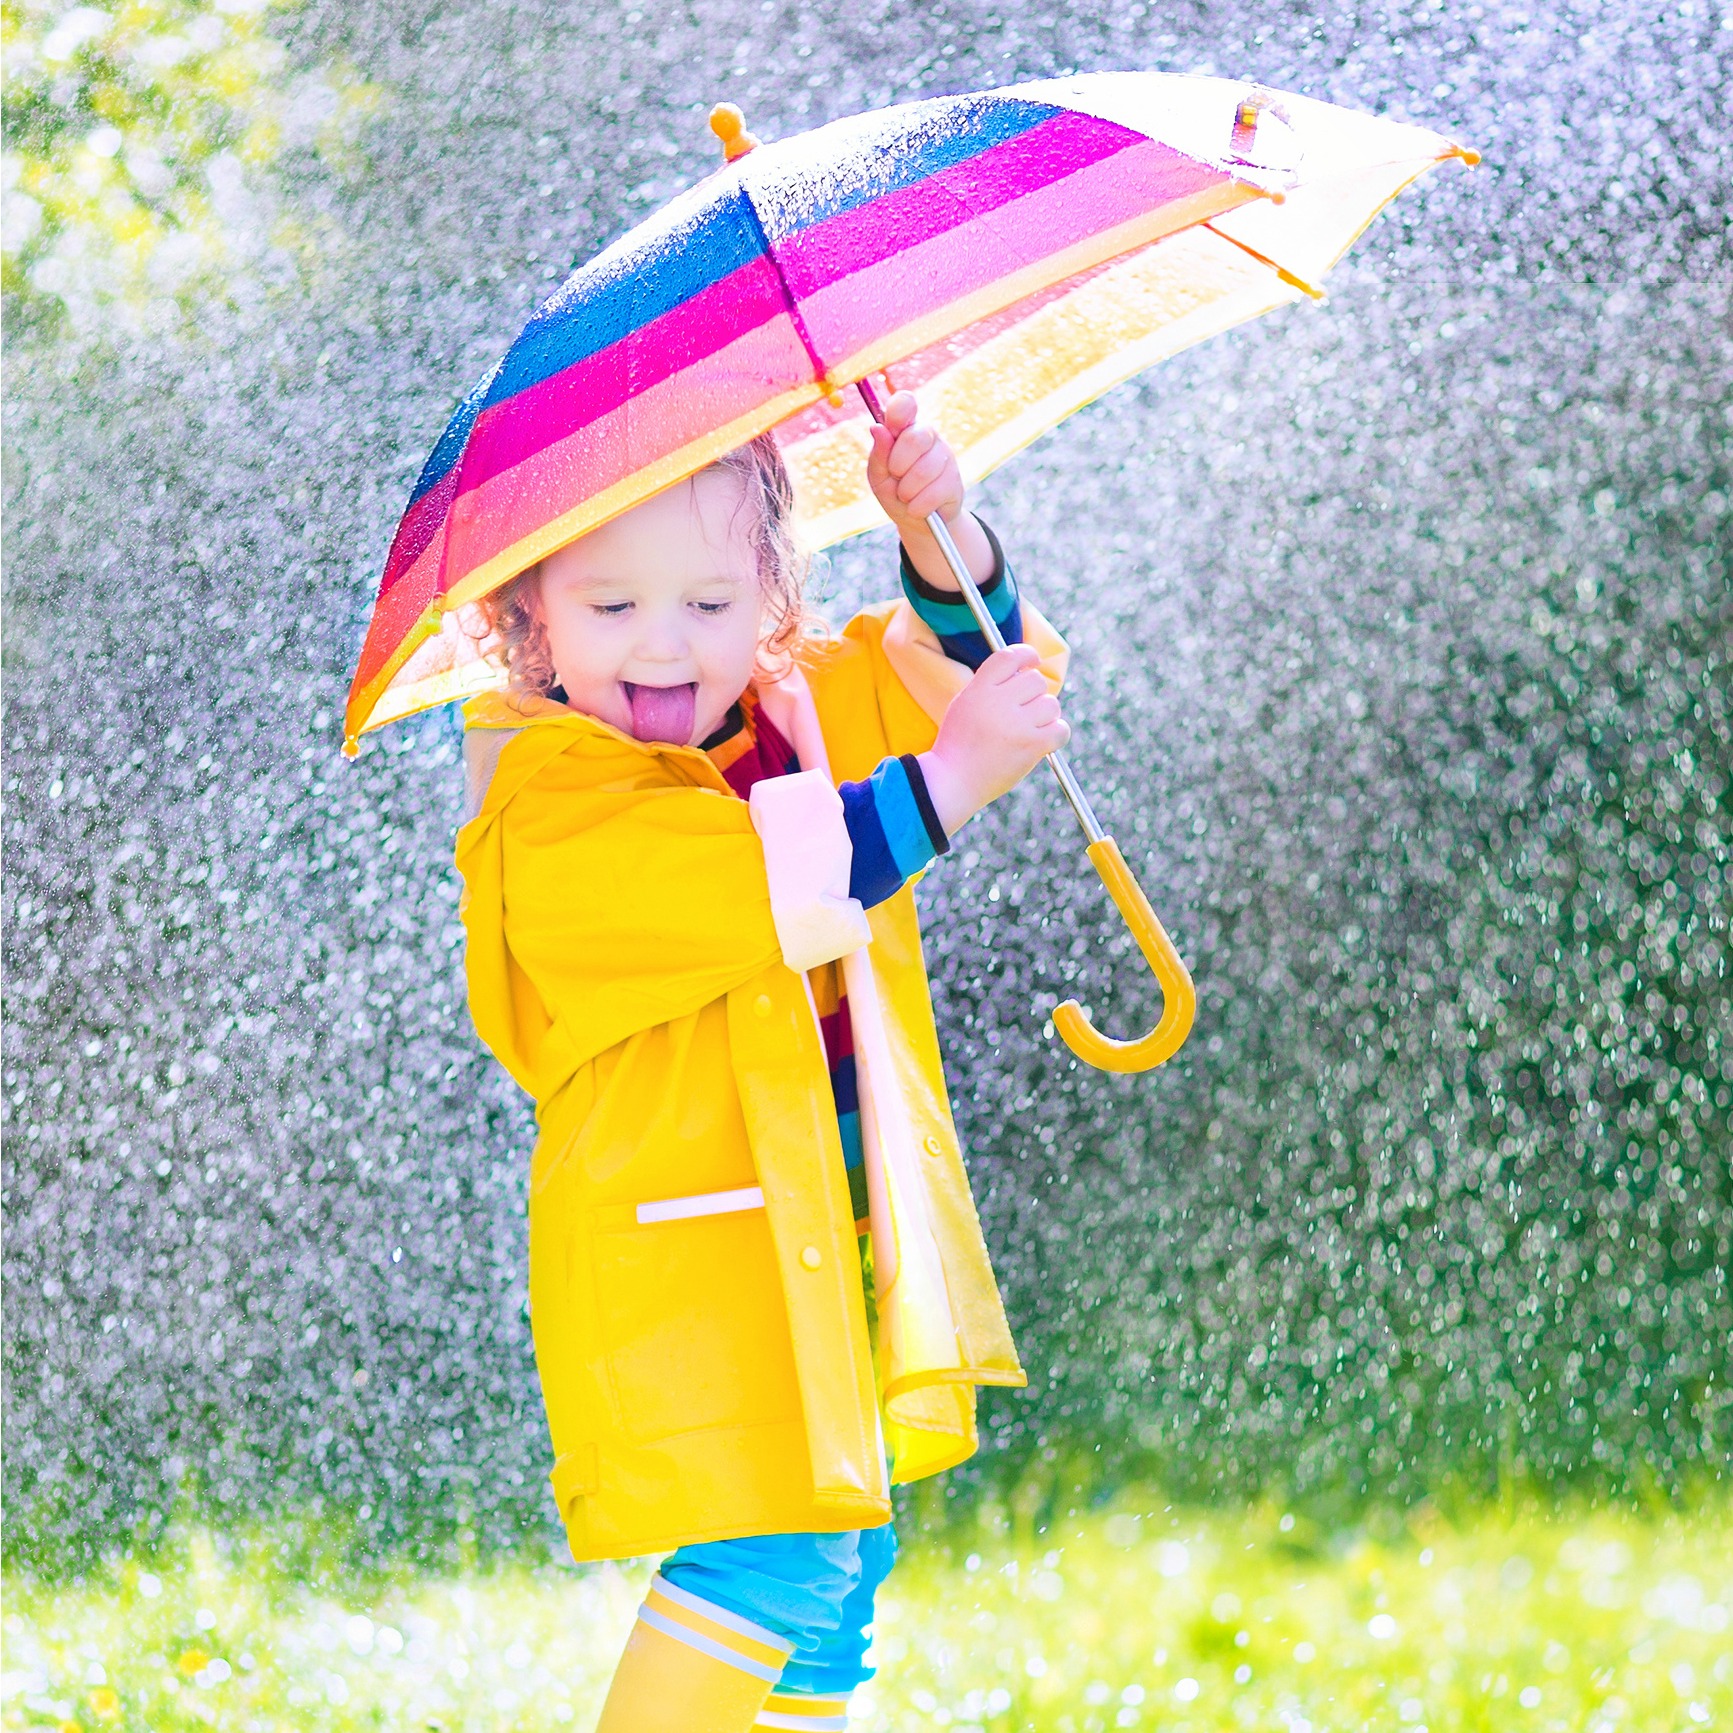 10 Unexpected Places to Take a Toddler on a Cold or Rainy Day